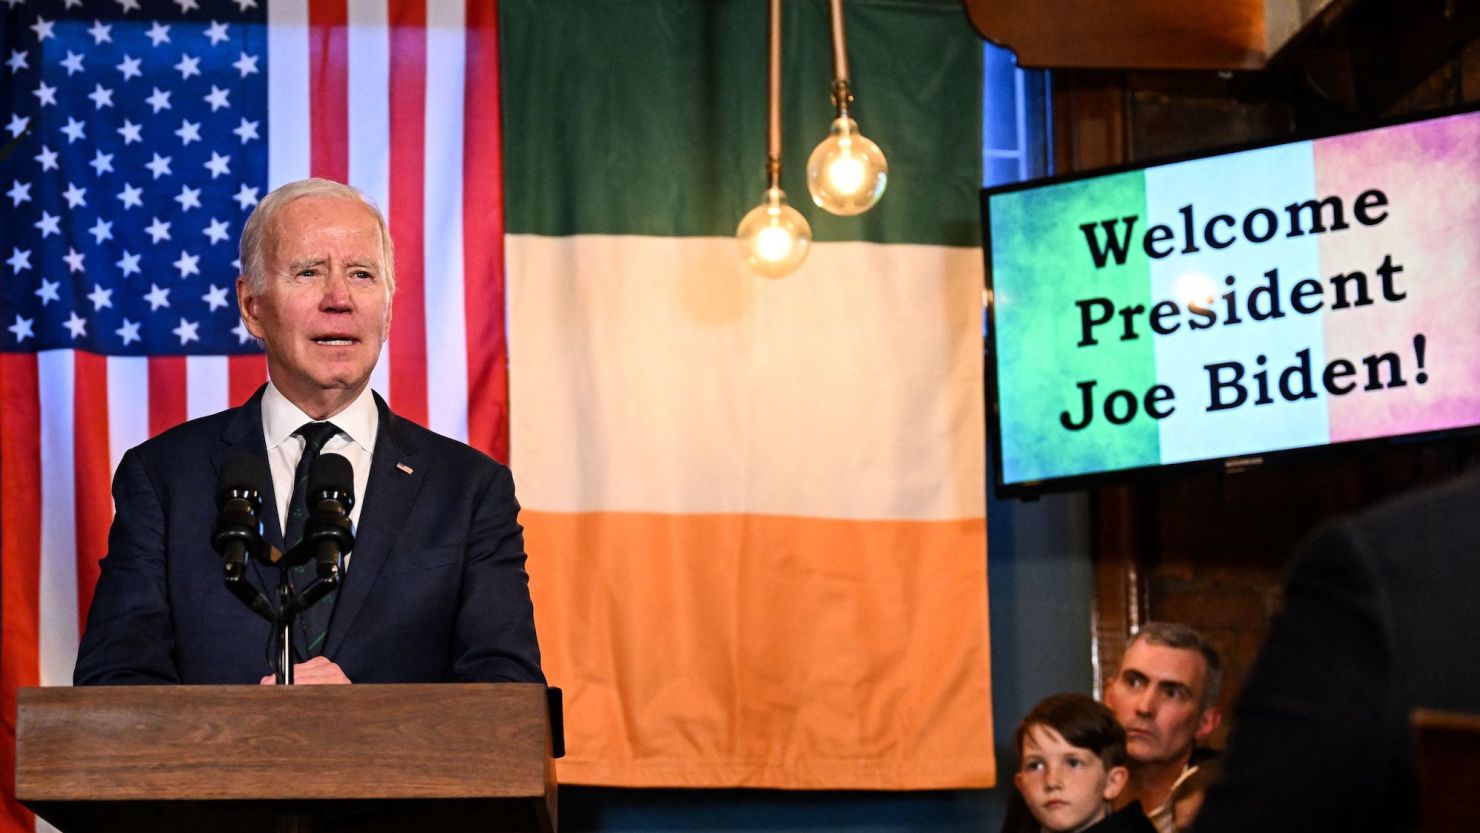 President Joe Biden delivers a speech at the Windsor Bar in Dundalk, on April 12, 2023, as part of a four days trip to Northern Ireland and Ireland for the 25th anniversary commemorations of the "Good Friday Agreement". 